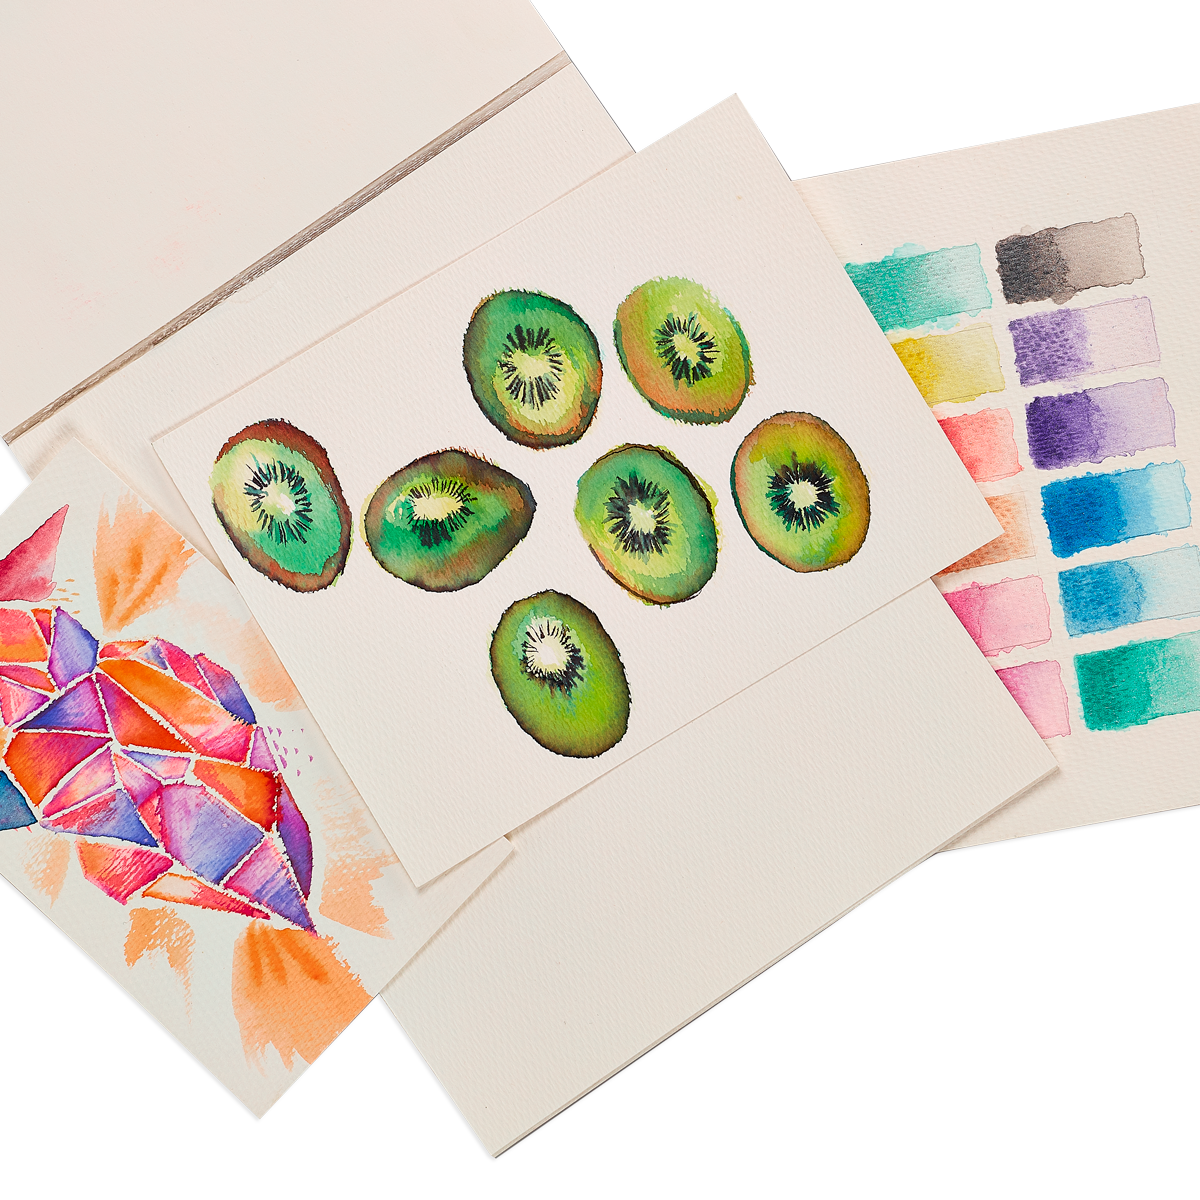 Colorful watercolor art created on Chroma Blends Watercolor Paper Pad fanned out